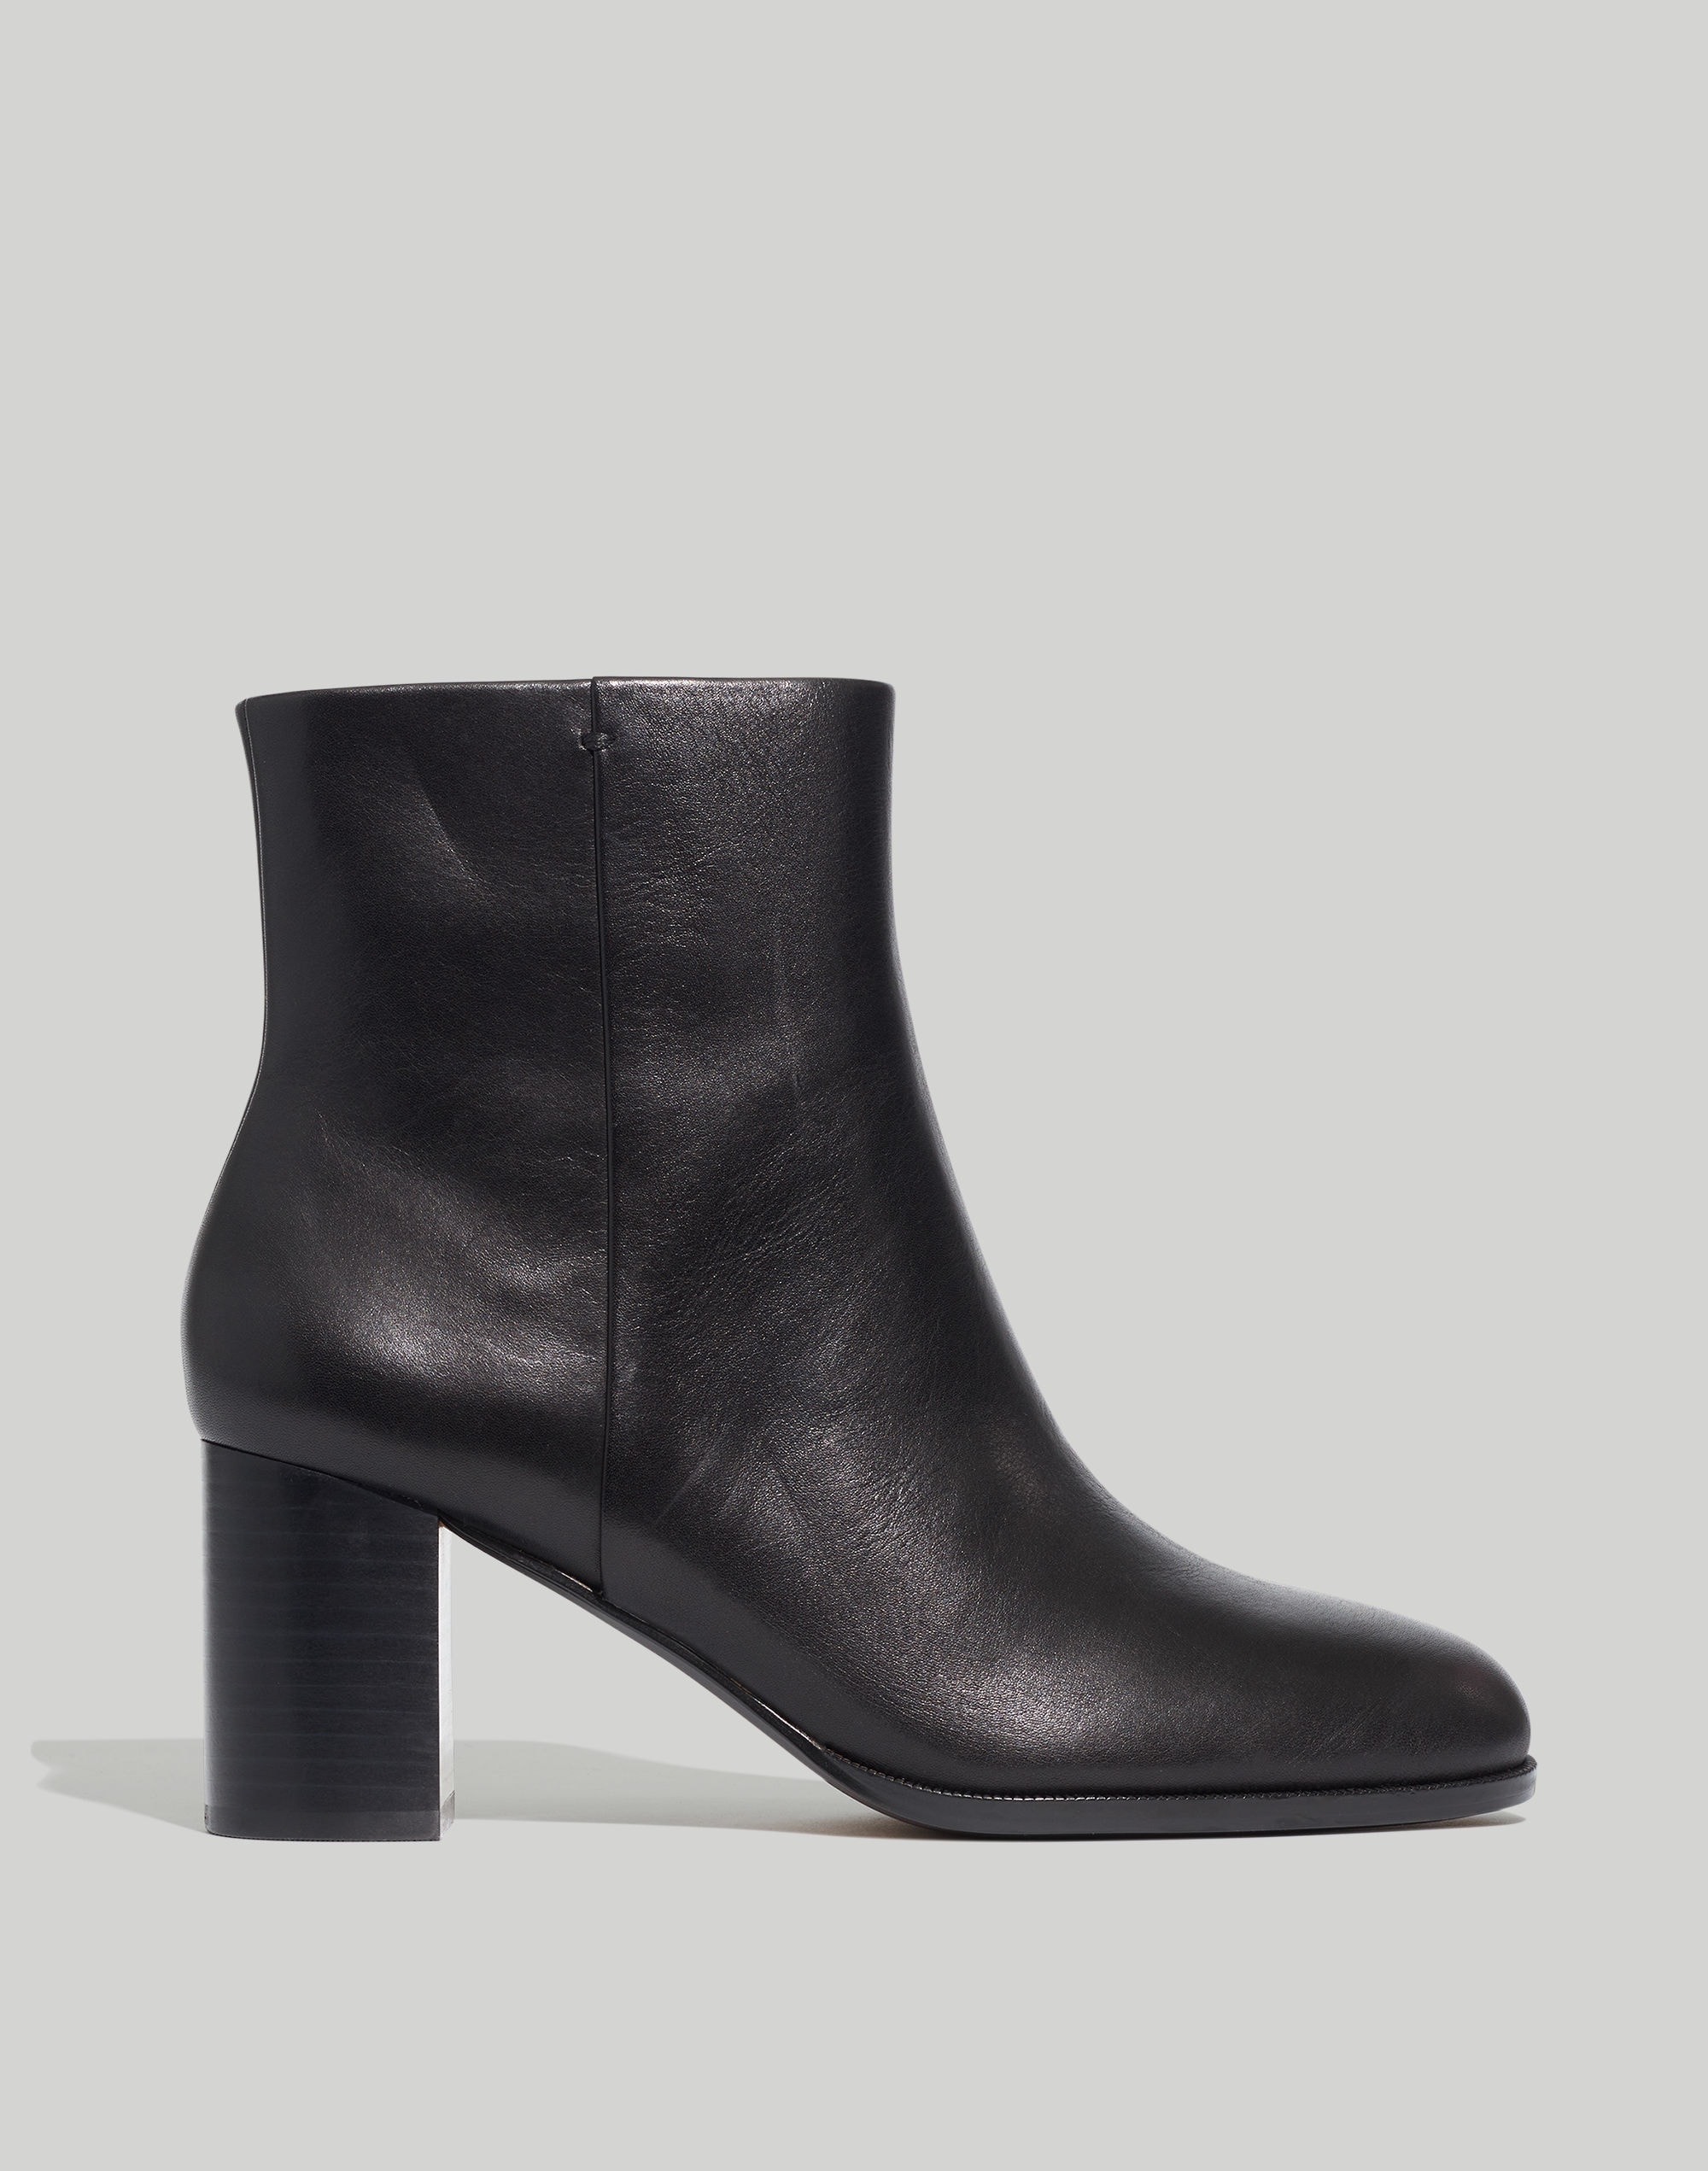 The Mira Side-Seam Ankle Boot in Leather